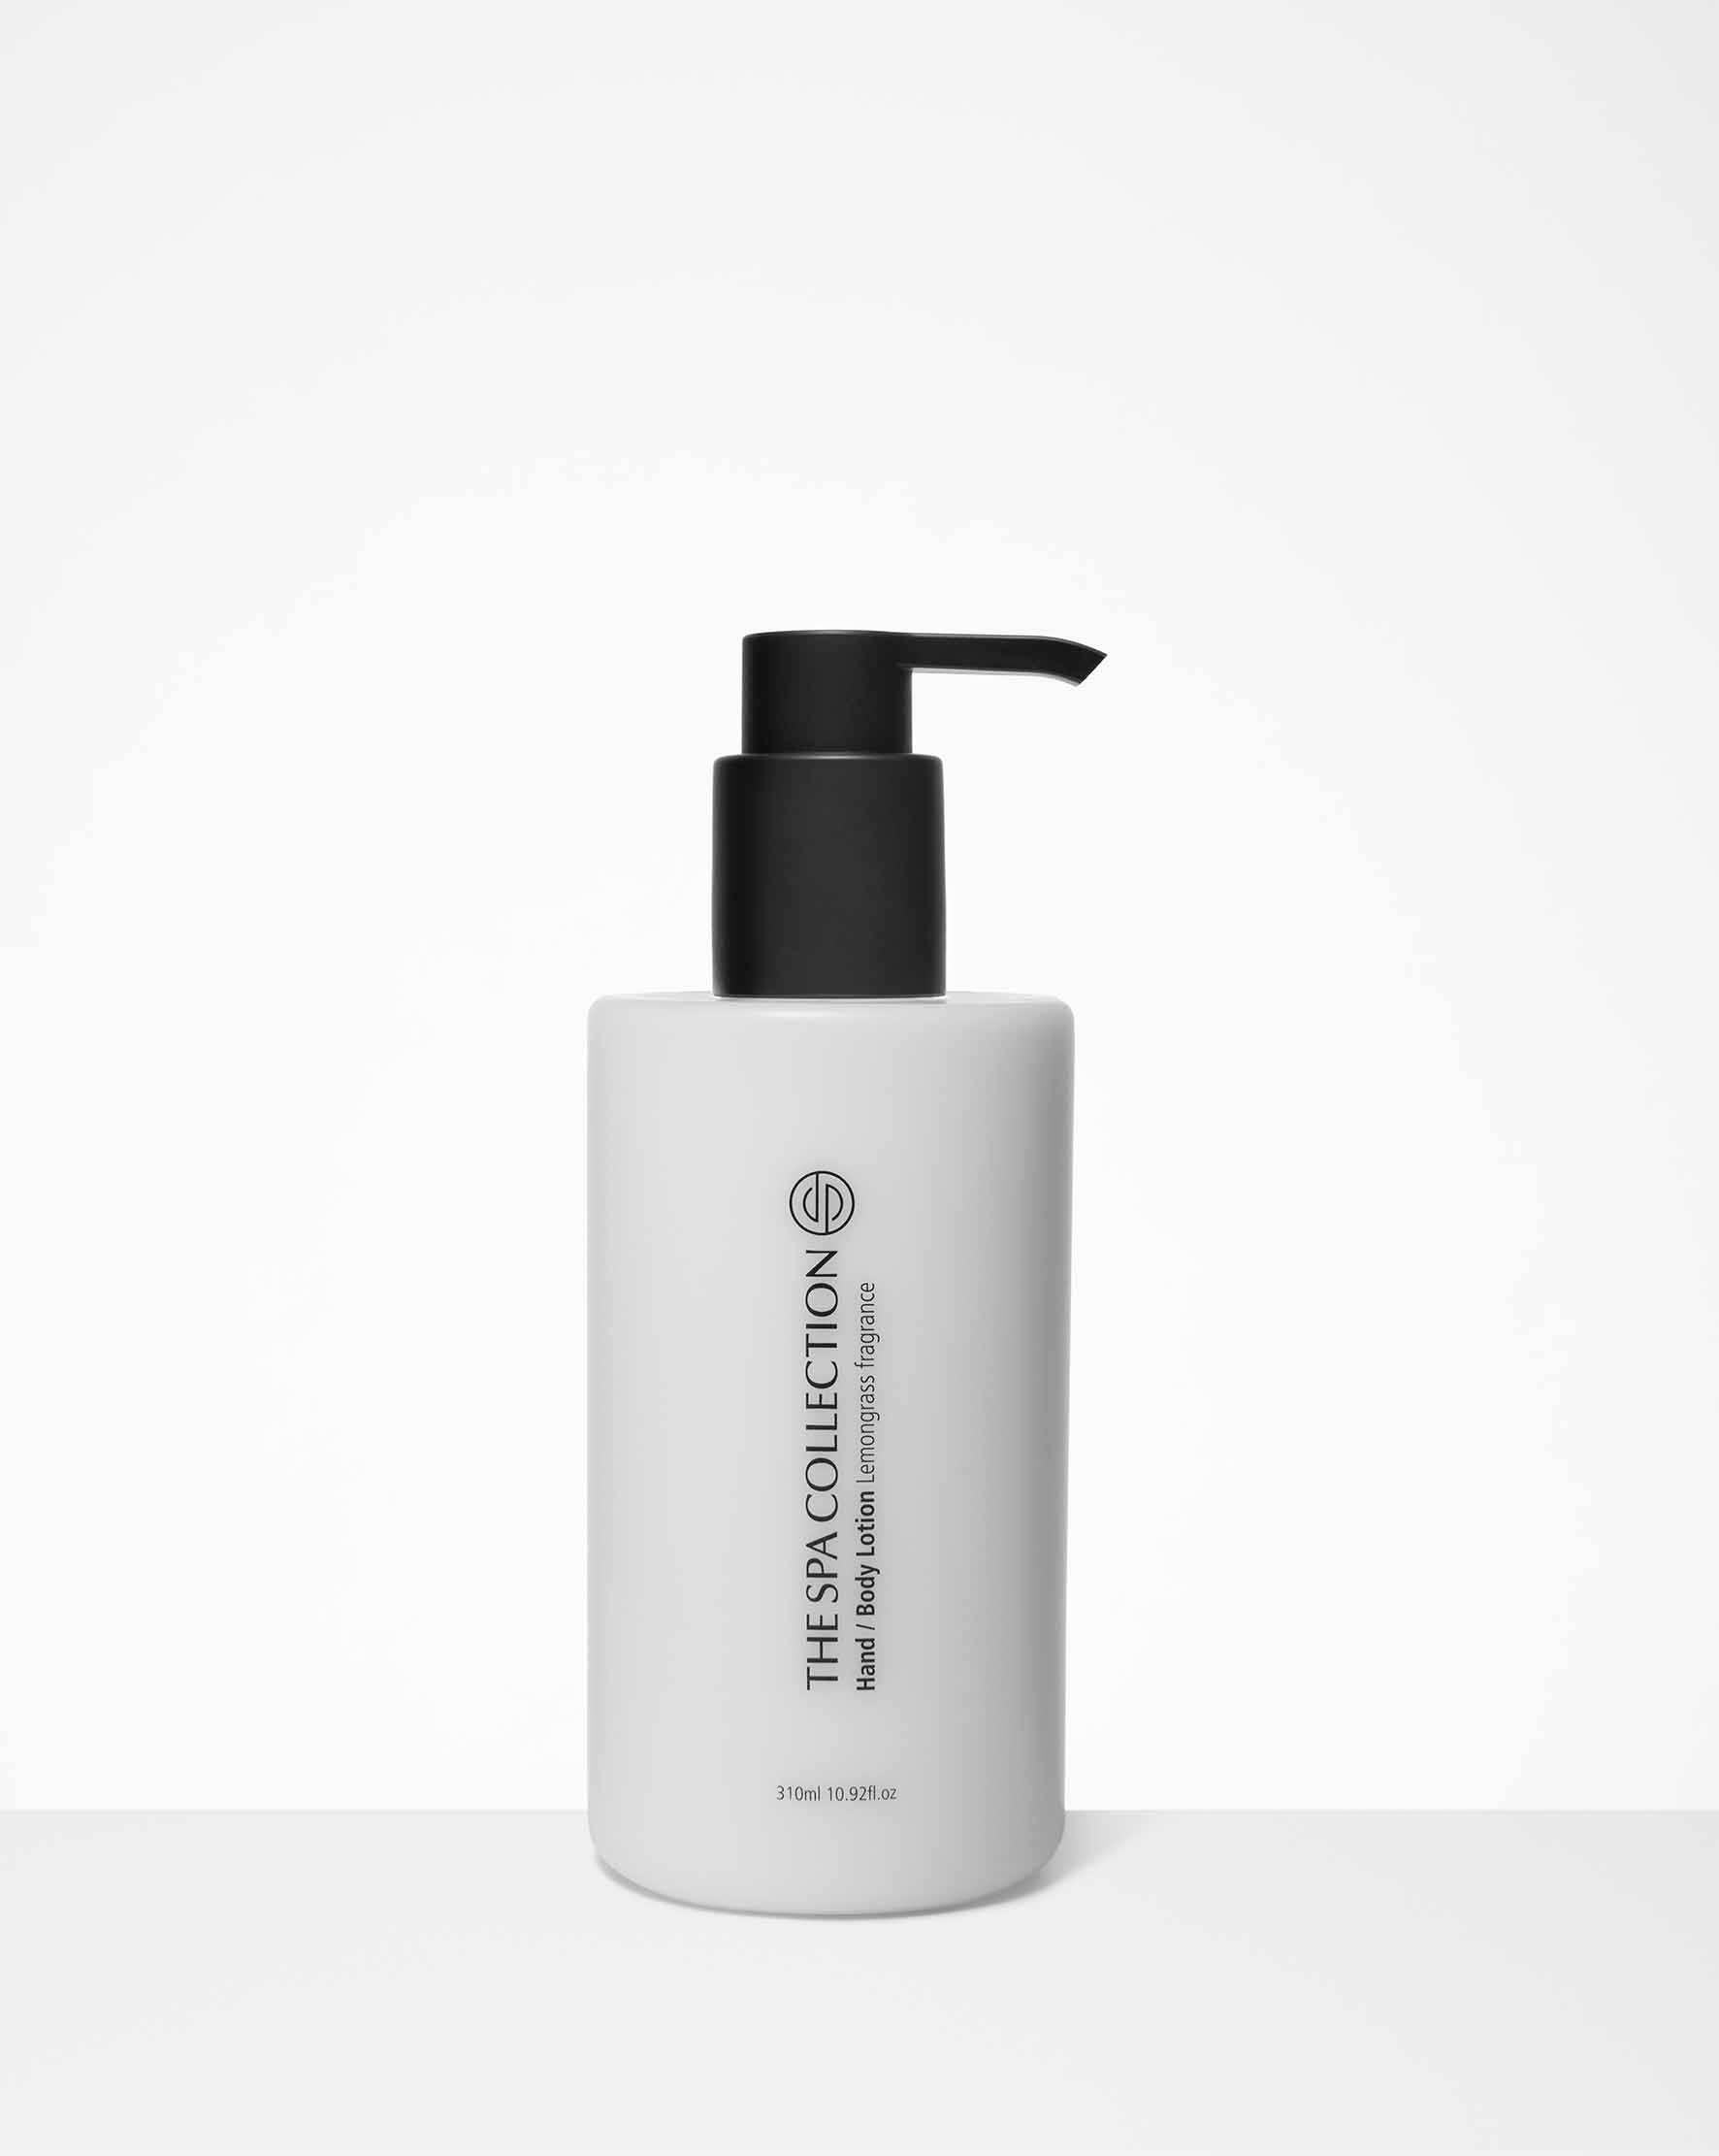 THE SPA COLLECTION Hand & Body Lotion-Spender 310 ml   